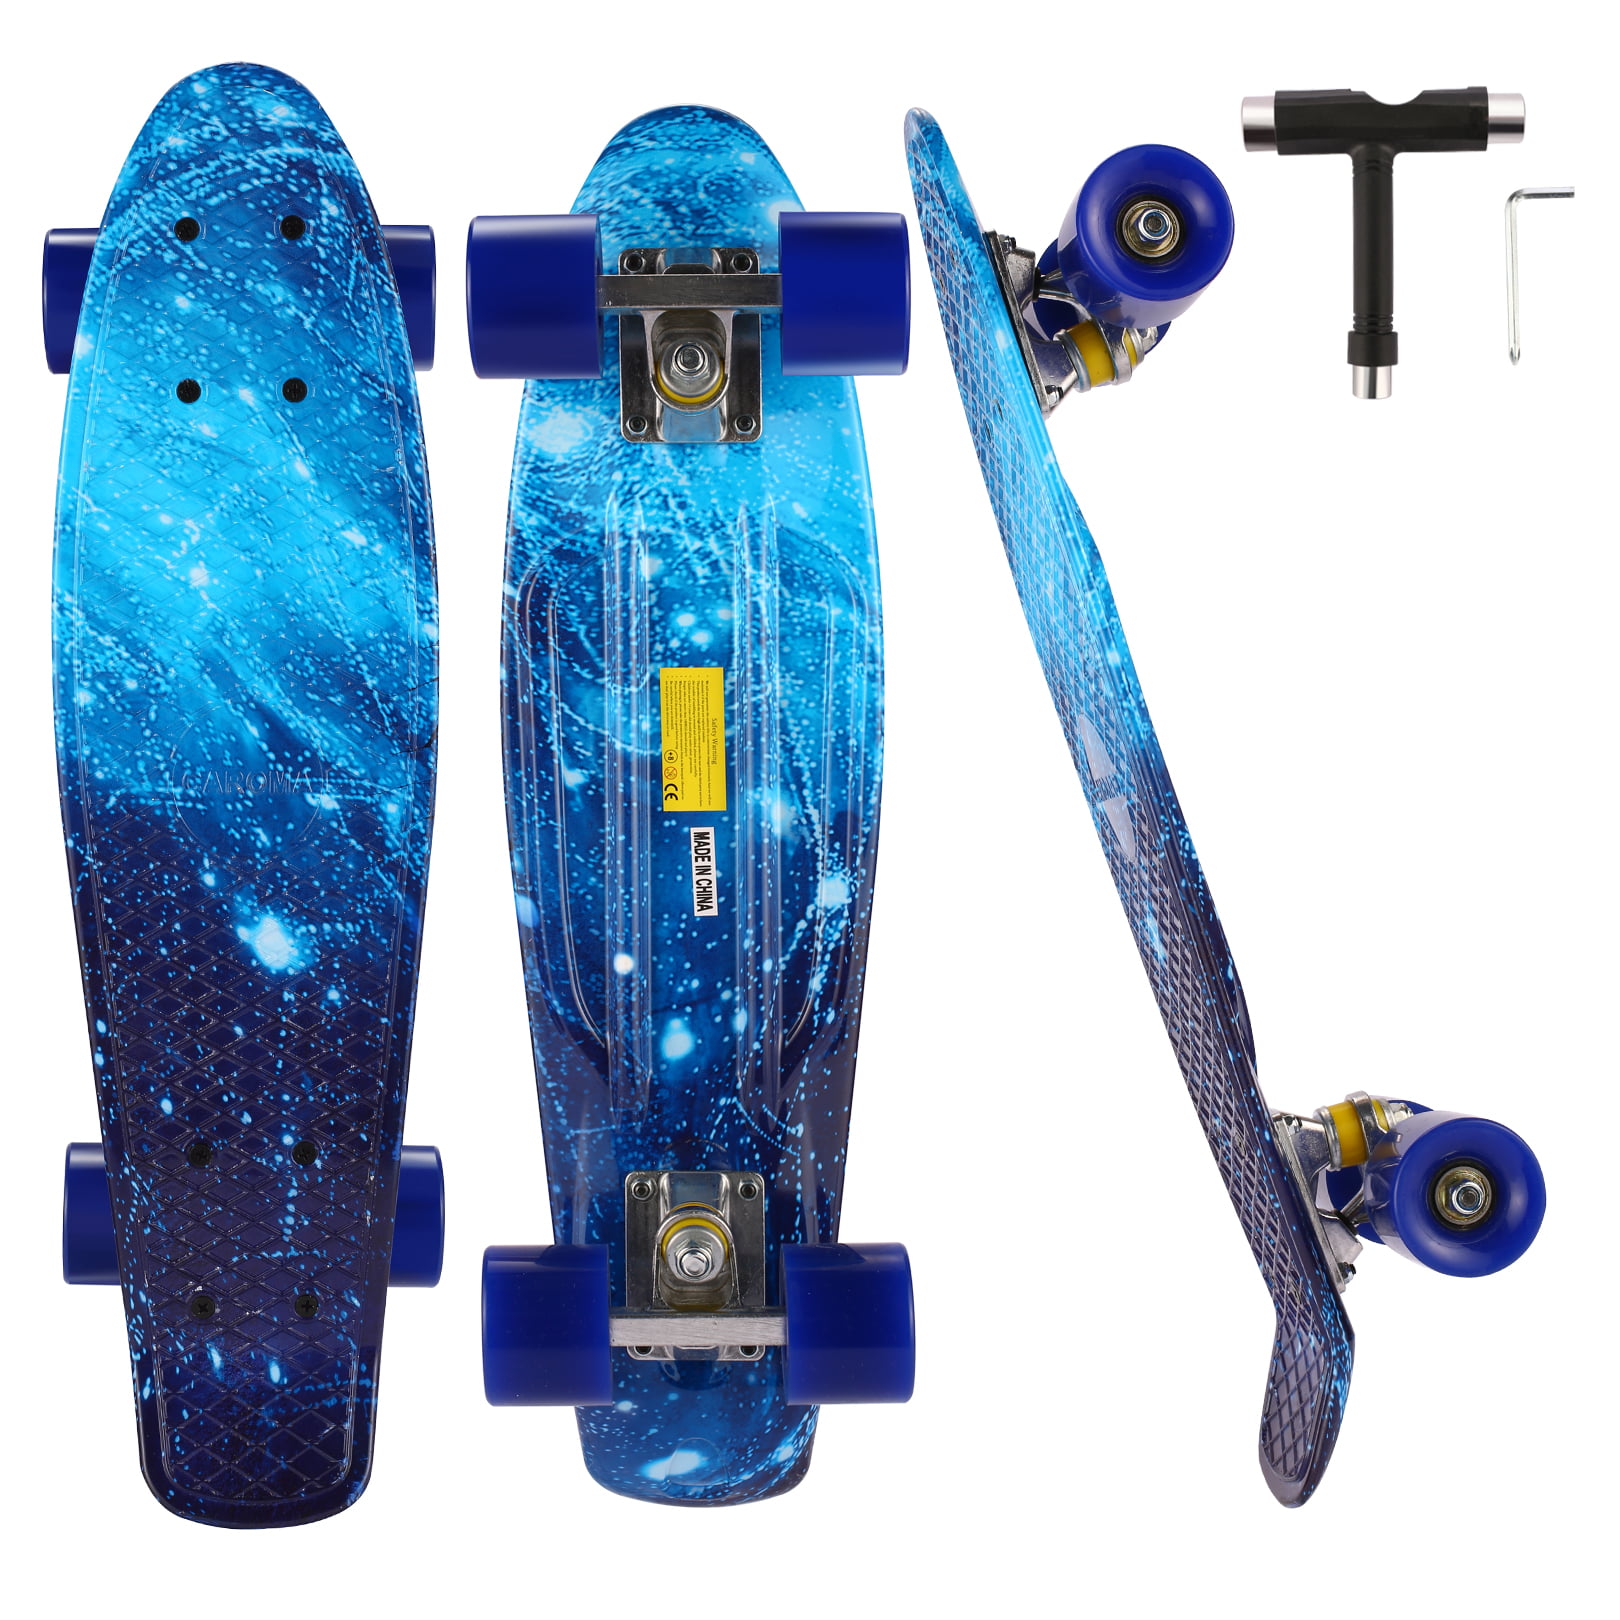 Hiboy 22 Complete Skateboards Mini Cruiser with Colorful LED Light Up Wheels for Kids Beginners Youths 